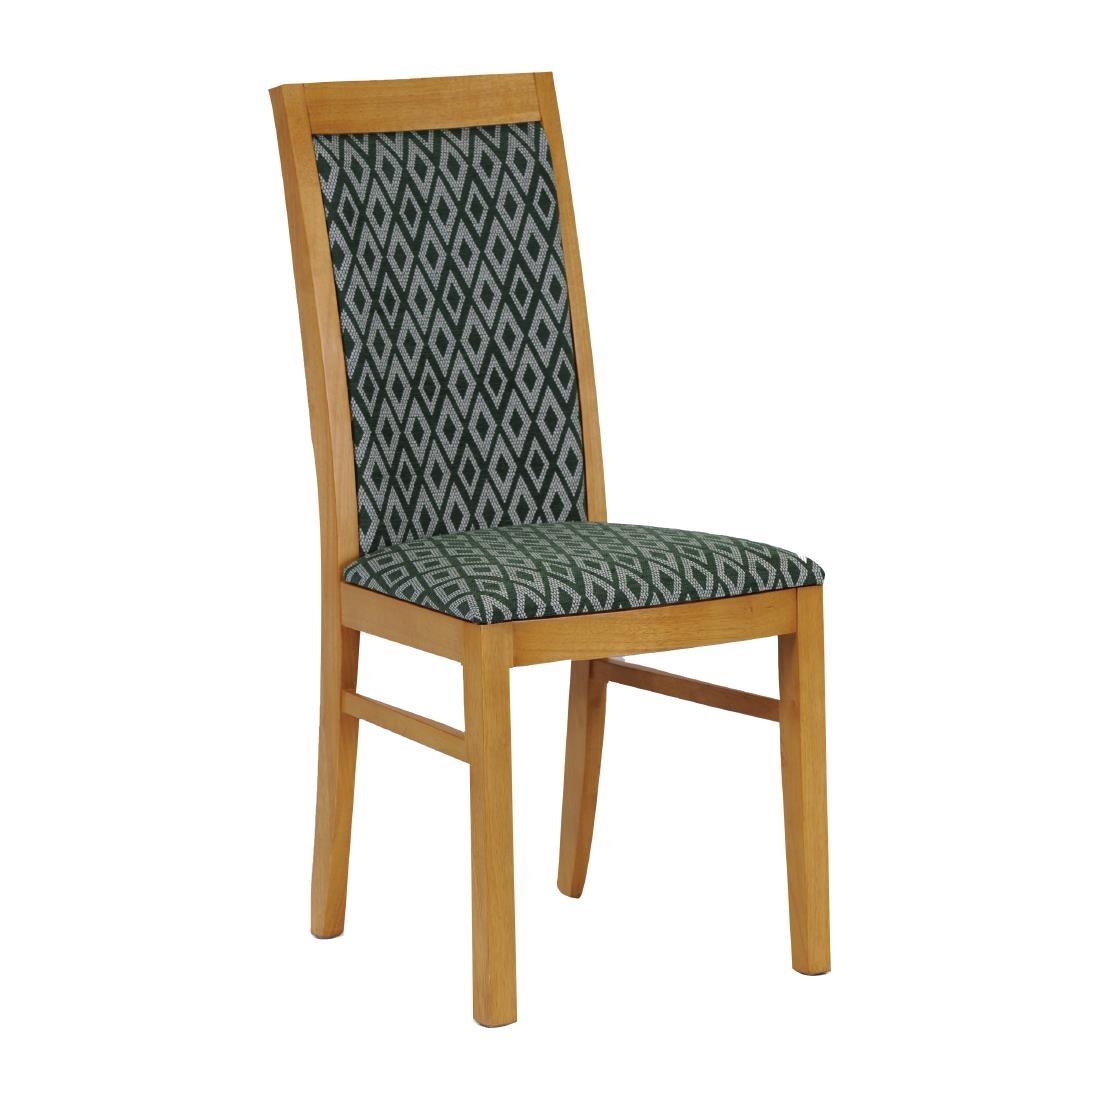 Brooklyn Padded Back Soft Oak Dining Chair with Green Diamond Padded Seat and Back (Pack of 2) - FT419  - 1